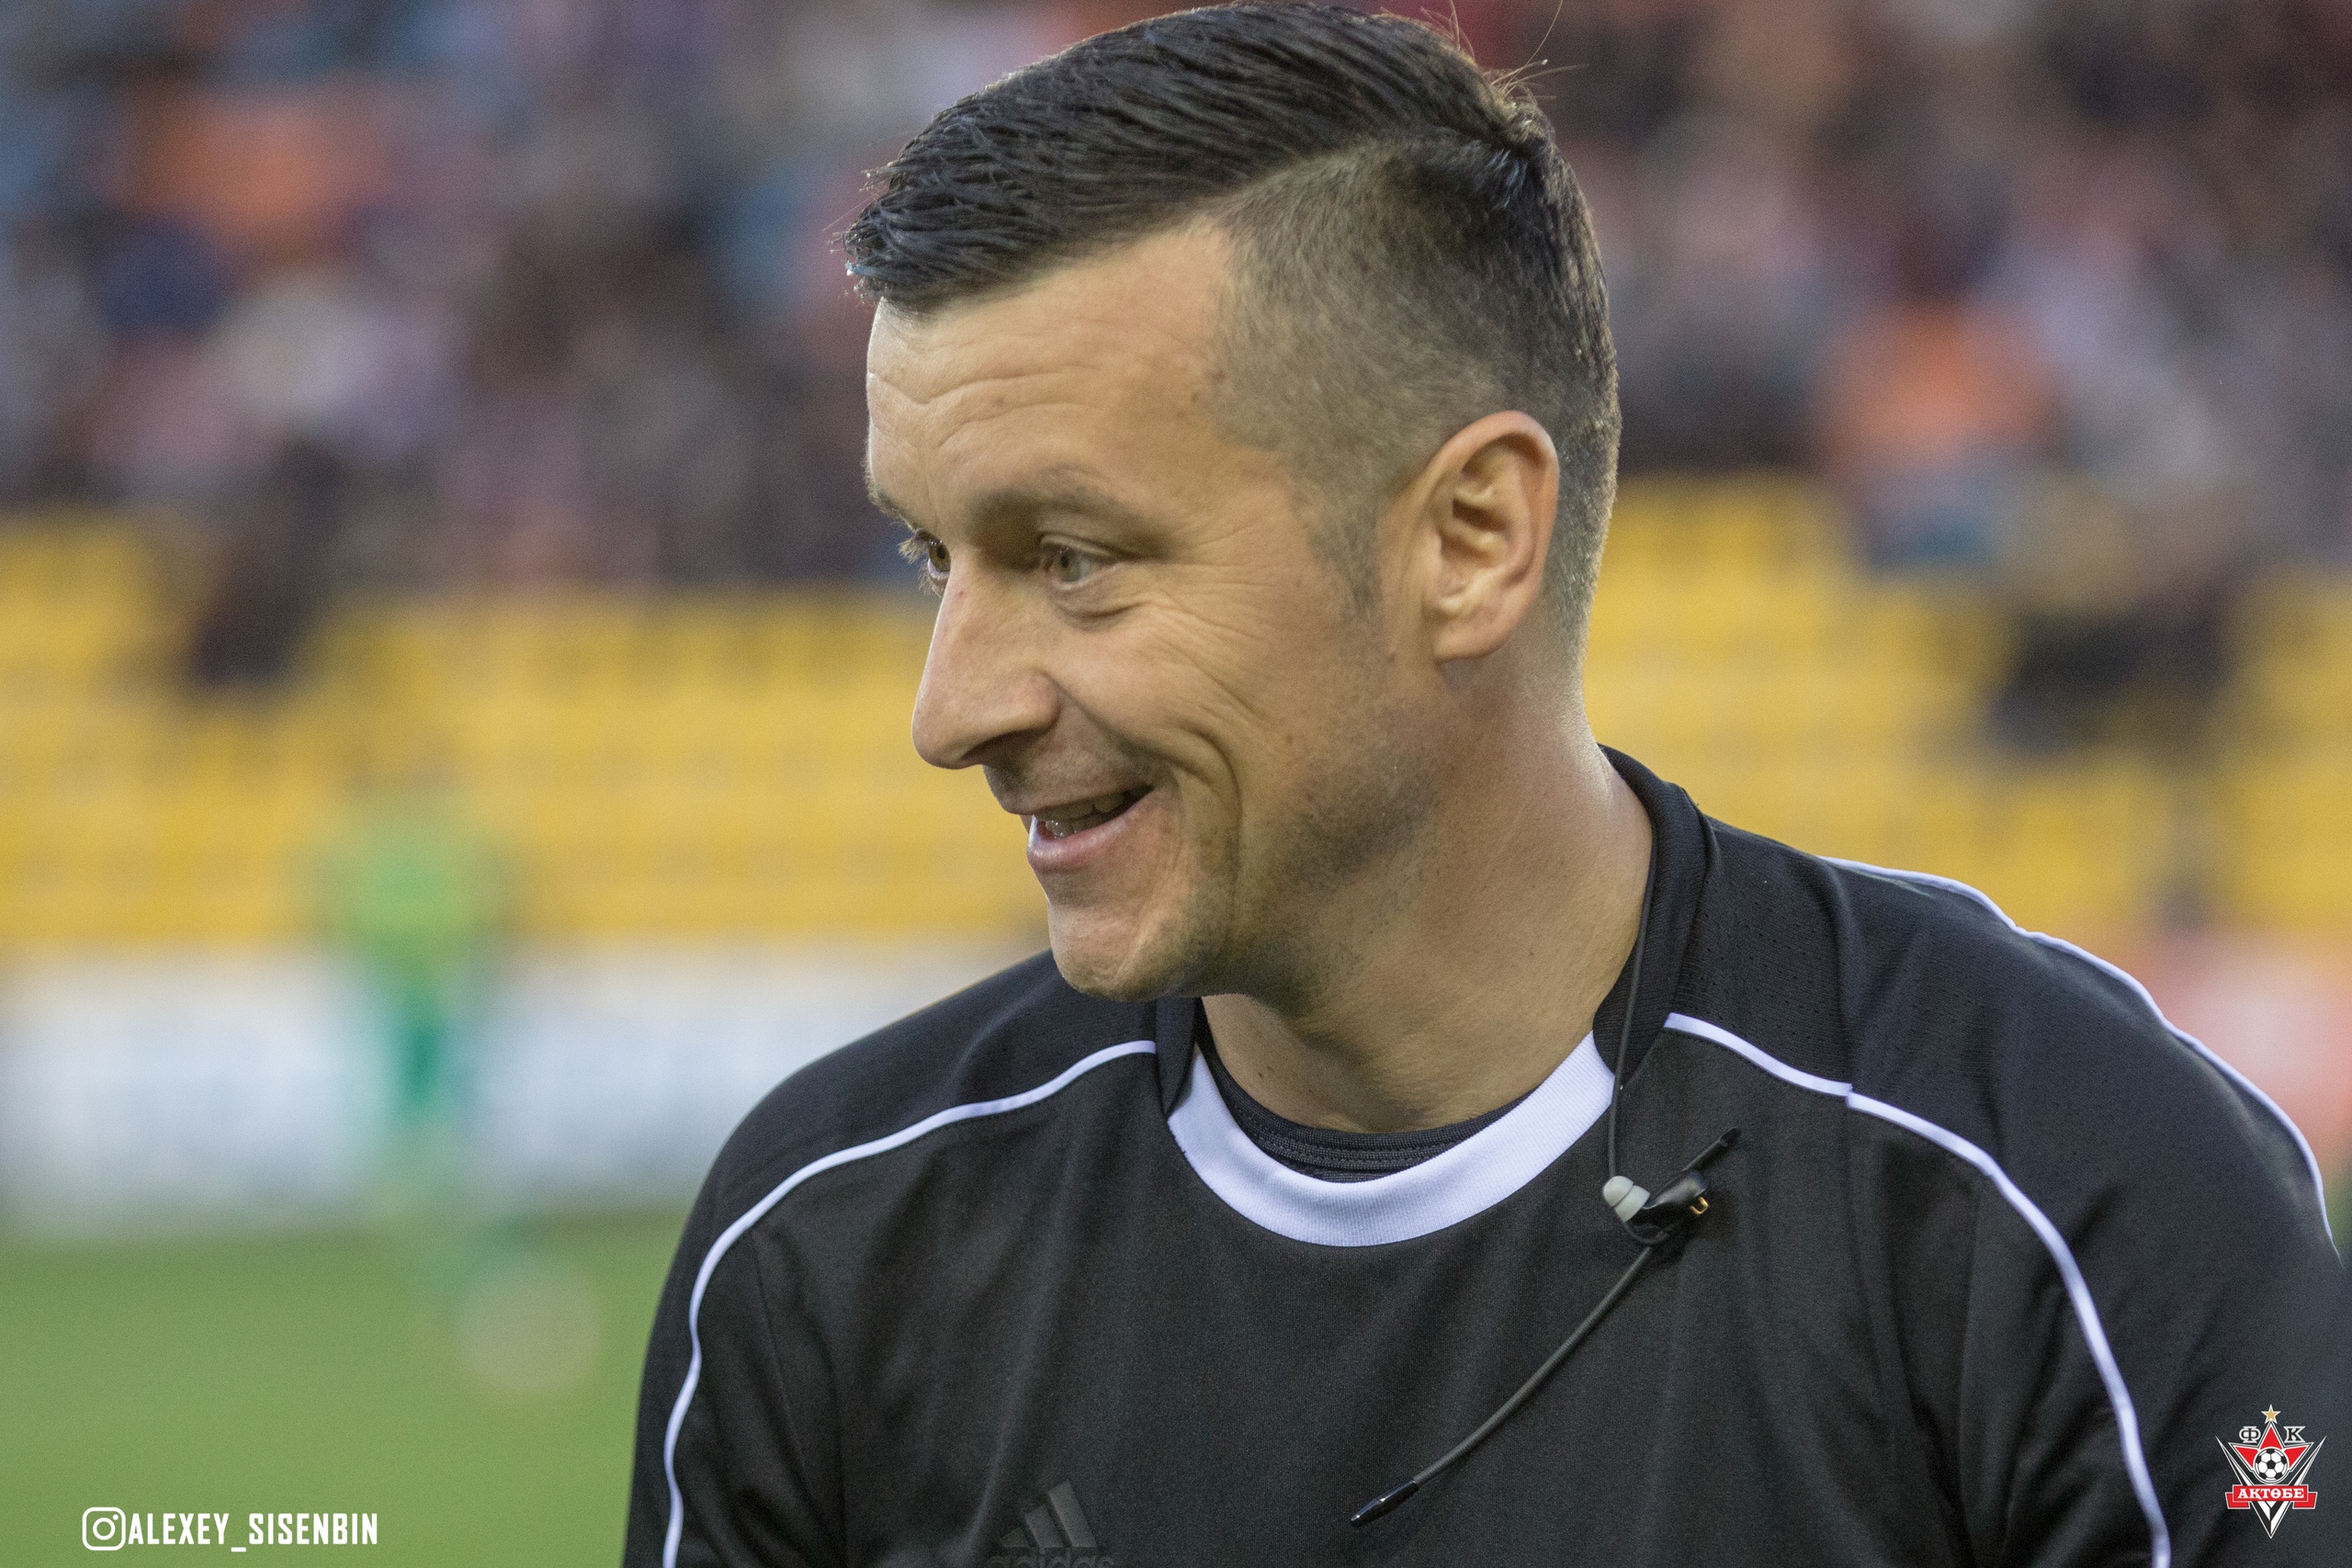 Denis Izmailov is the head referee of the match between Aktobe – Maqtaaral